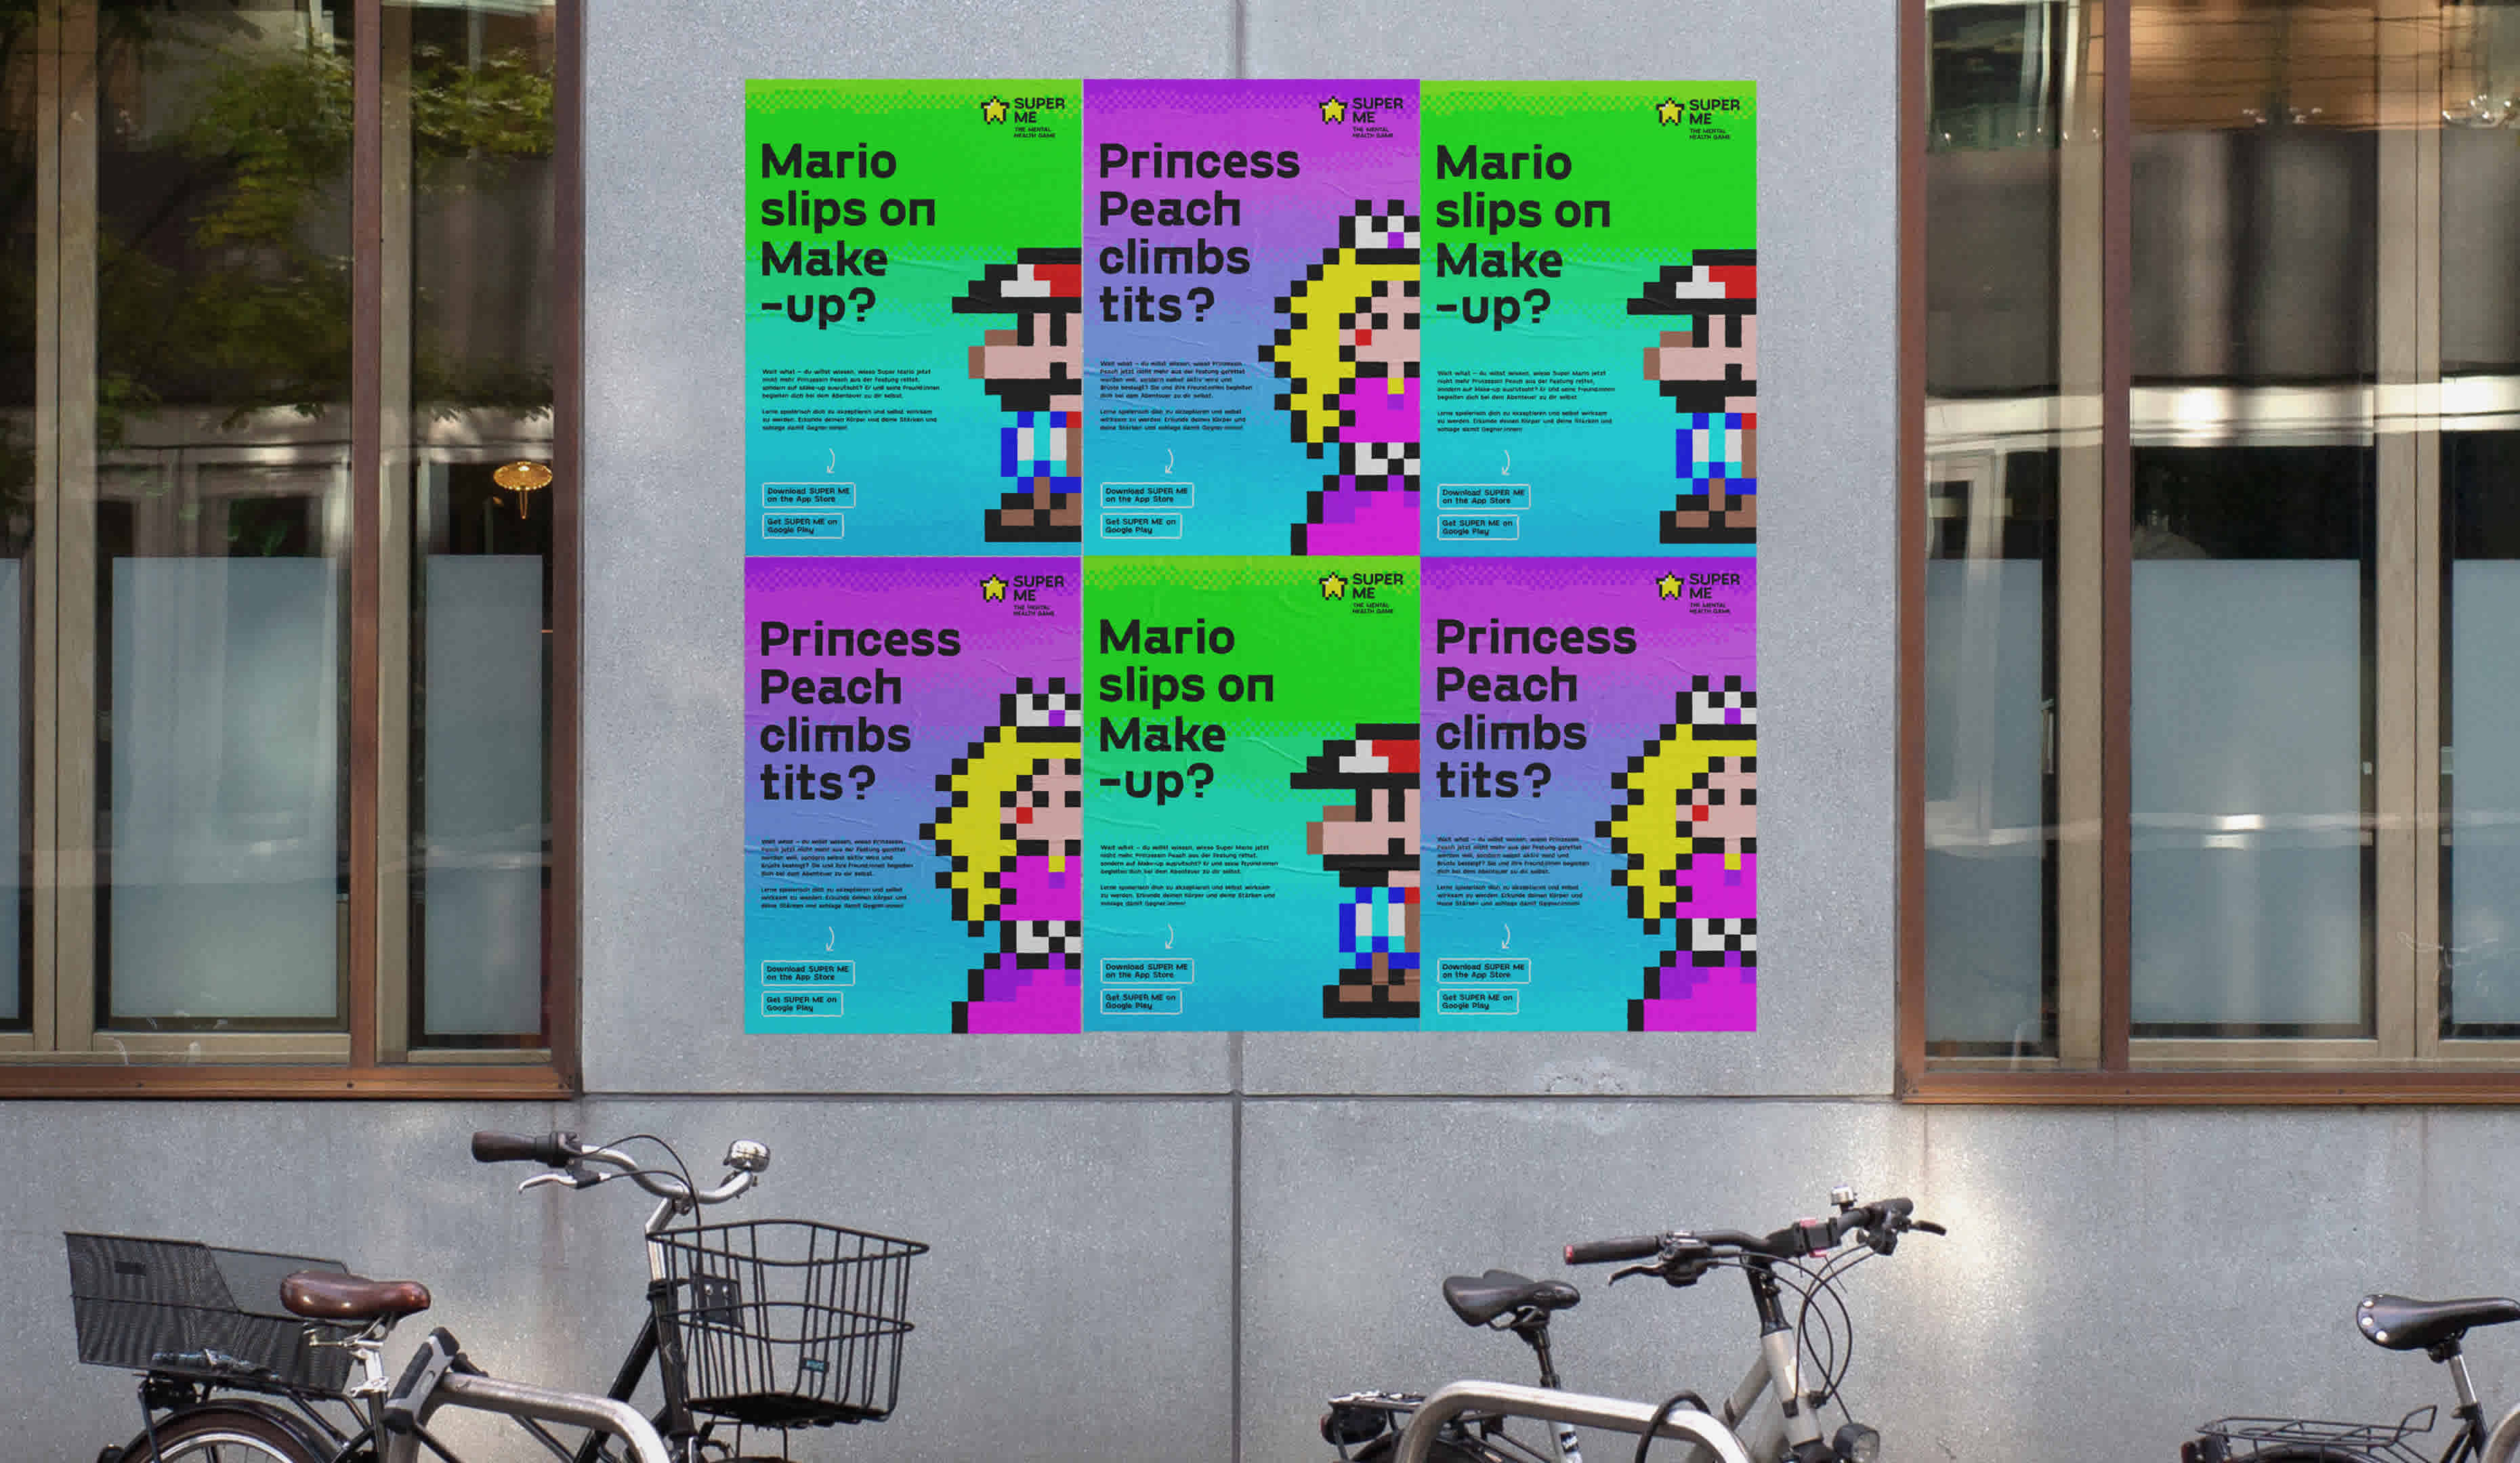 Several posters can be seen on one wall. Bicycles can be seen in front of them and a lively environment can be guessed. The posters are colorful and come from the Super Me campaign.